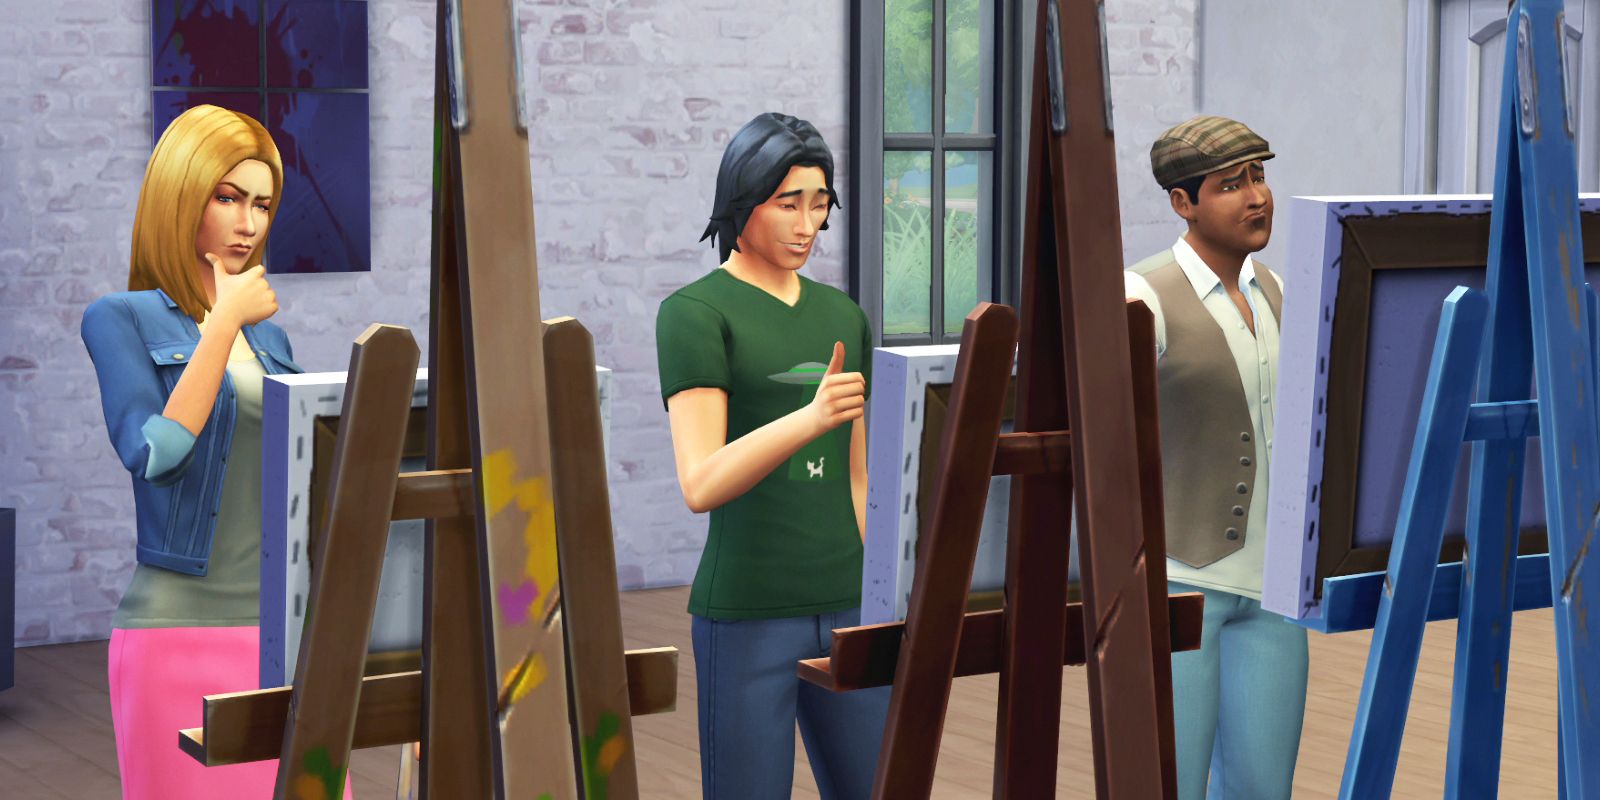 Sims 4 Expansion & Stuff Packs Essential For A Better Experience